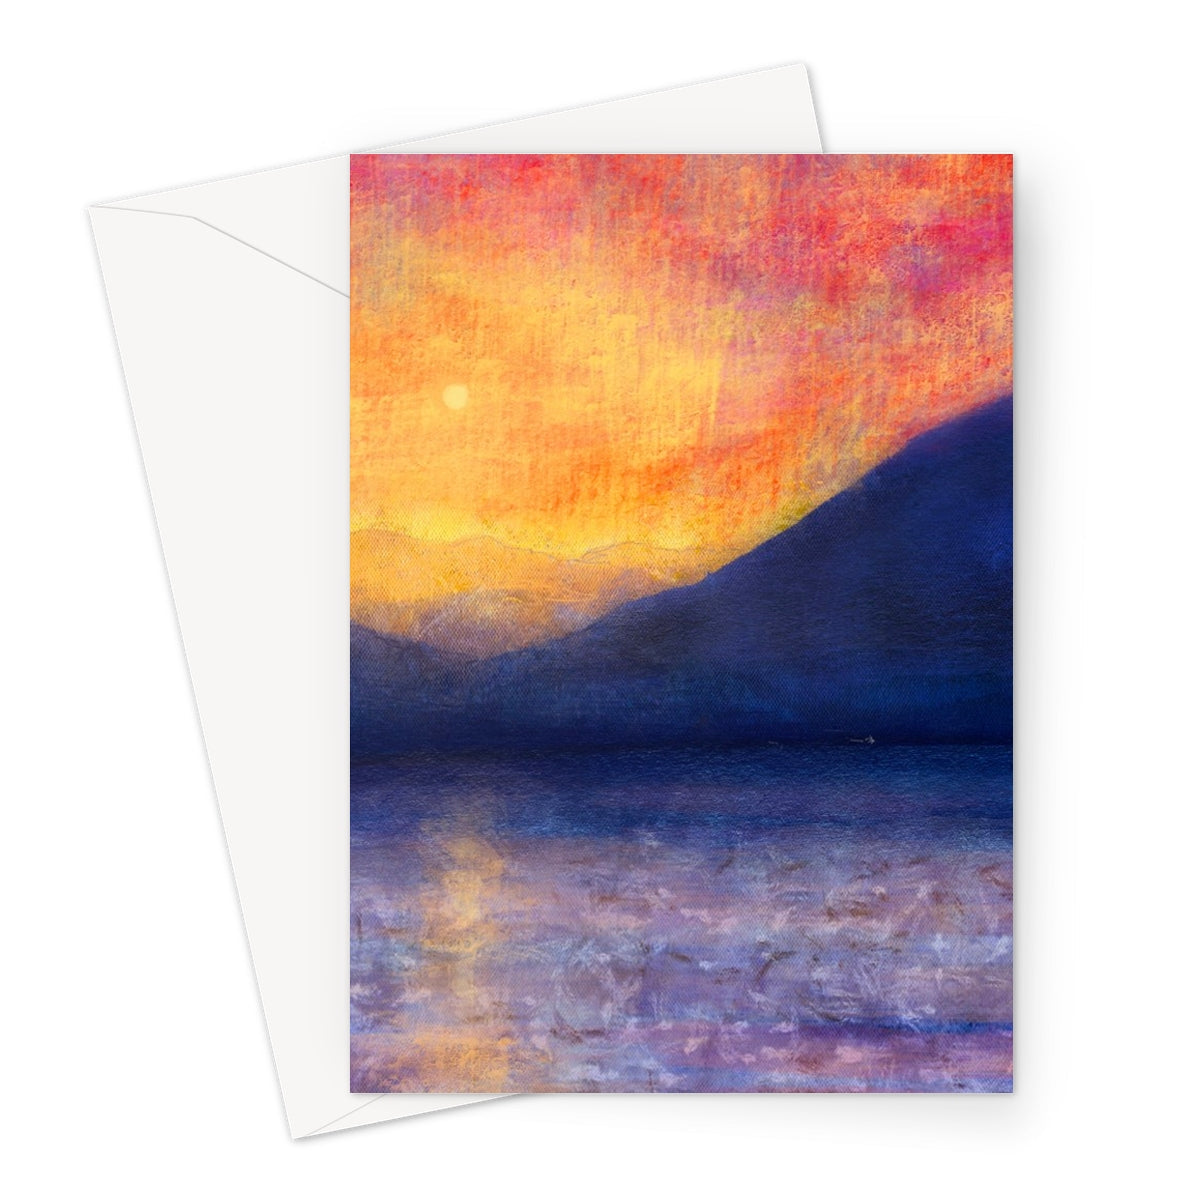 Sunset Approaching Mull Art Gifts Greeting Card-Greetings Cards-Hebridean Islands Art Gallery-A5 Portrait-10 Cards-Paintings, Prints, Homeware, Art Gifts From Scotland By Scottish Artist Kevin Hunter